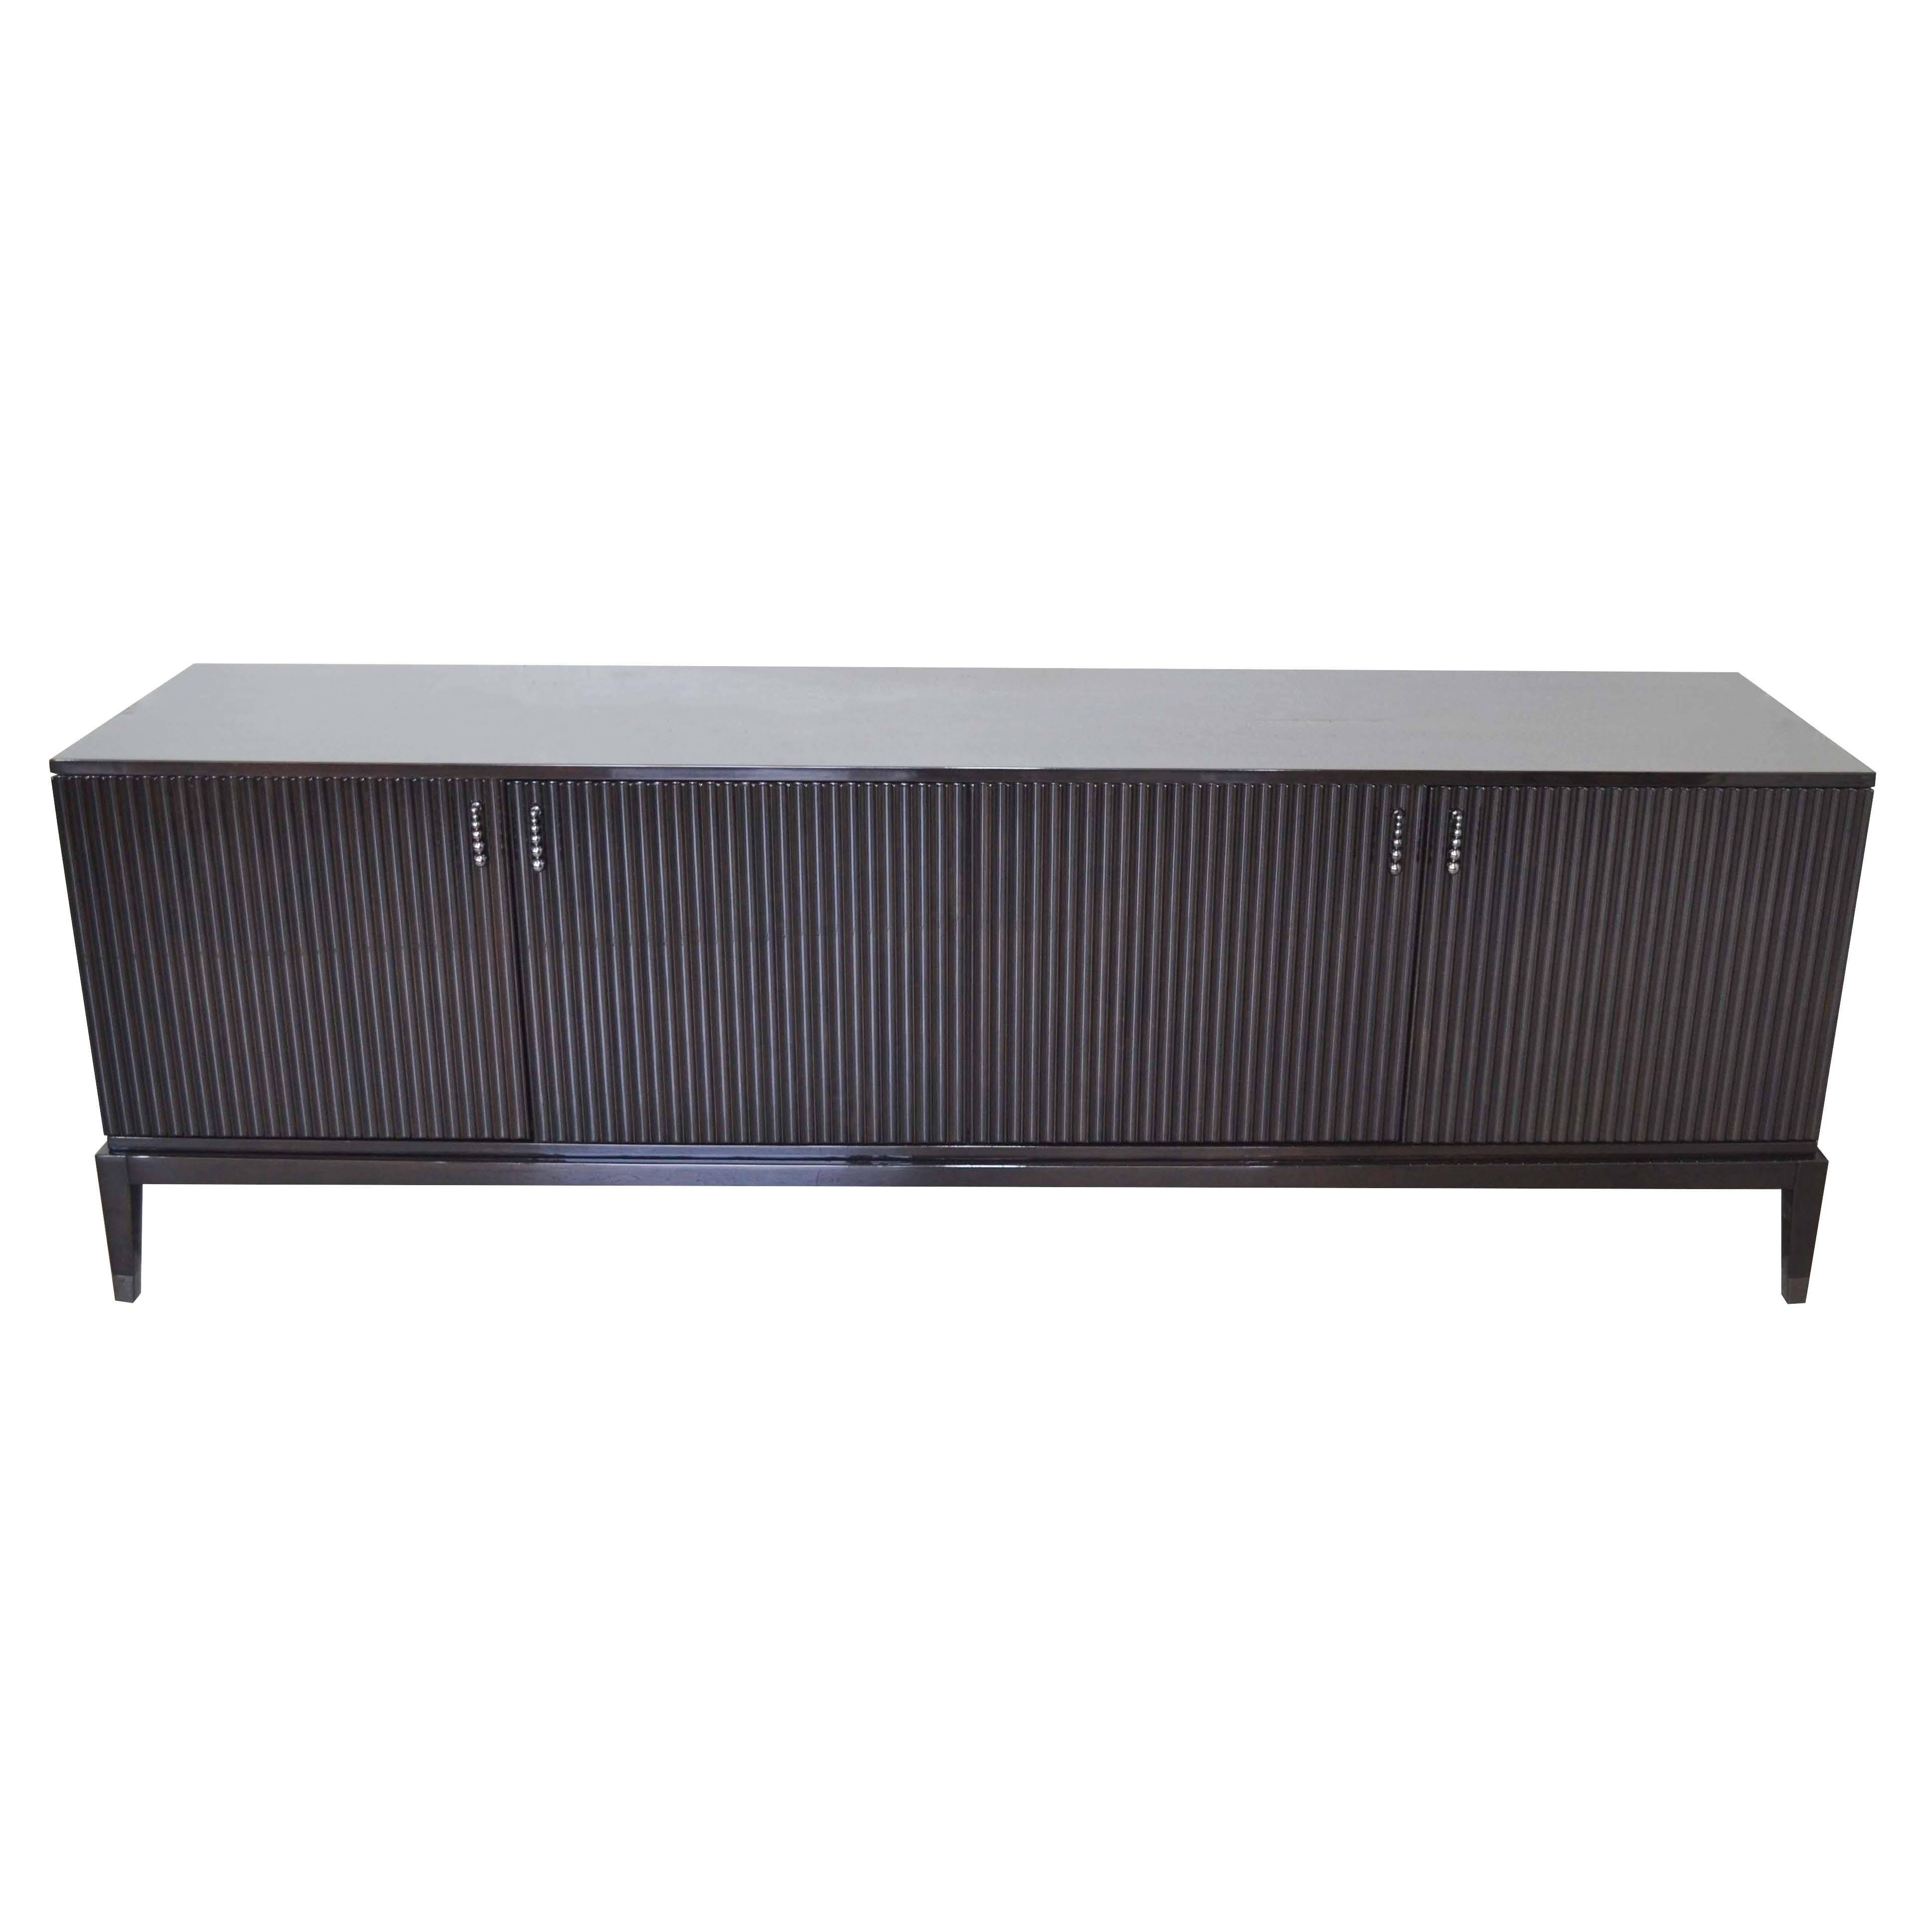 Art Deco Italian Sideboard in Ebony Brown Color with Four Doors For Sale